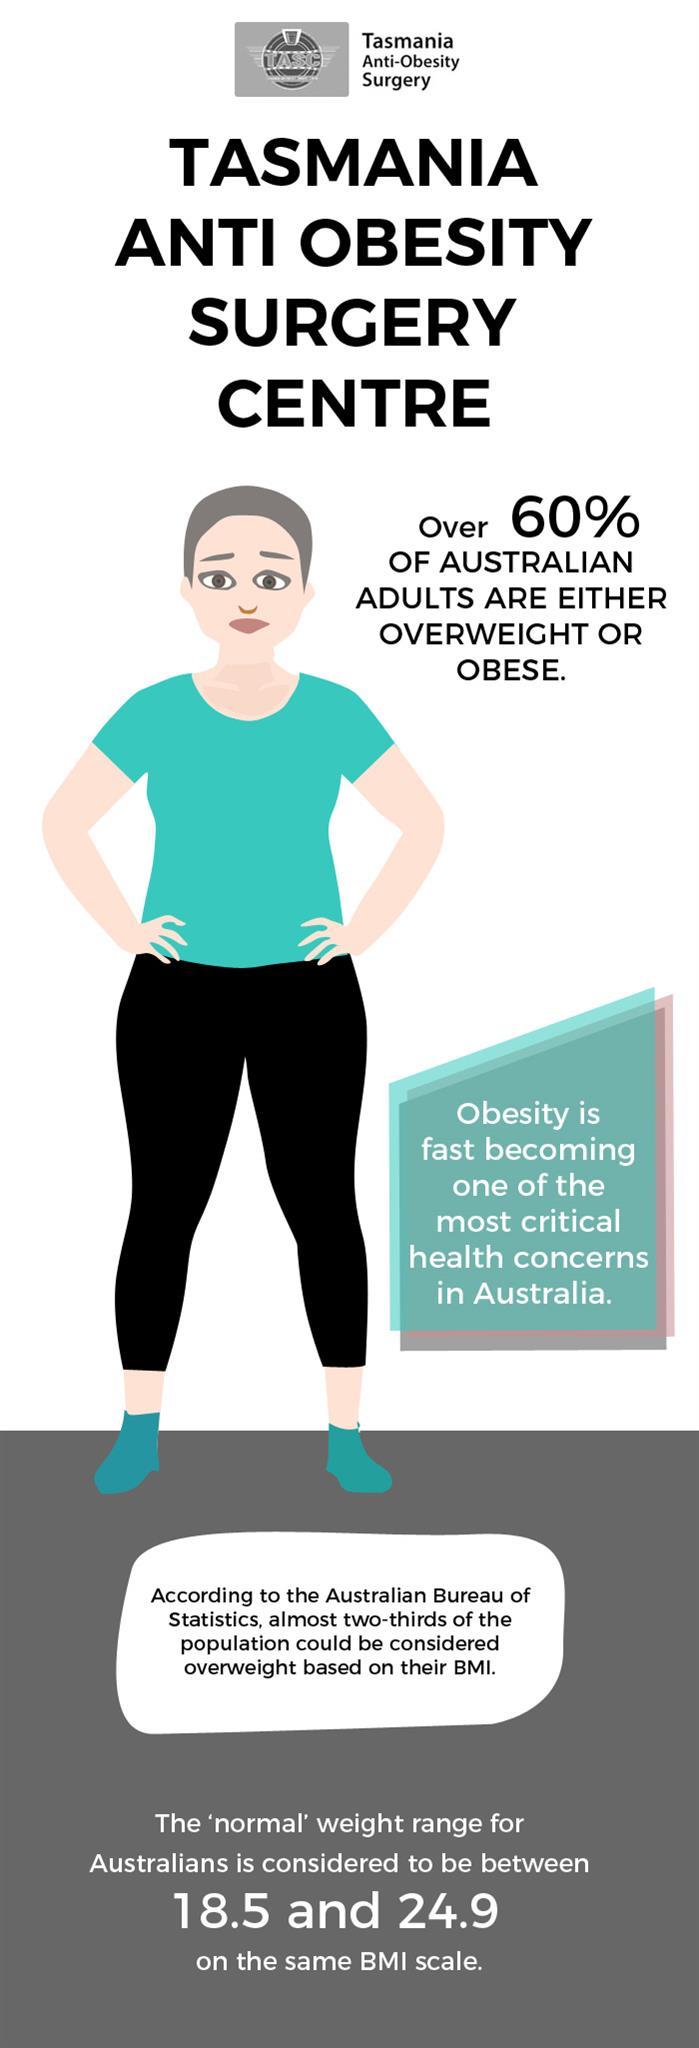 Get Your Weight Reduced in No Time with Tasmania Anti-Obesity Surgery